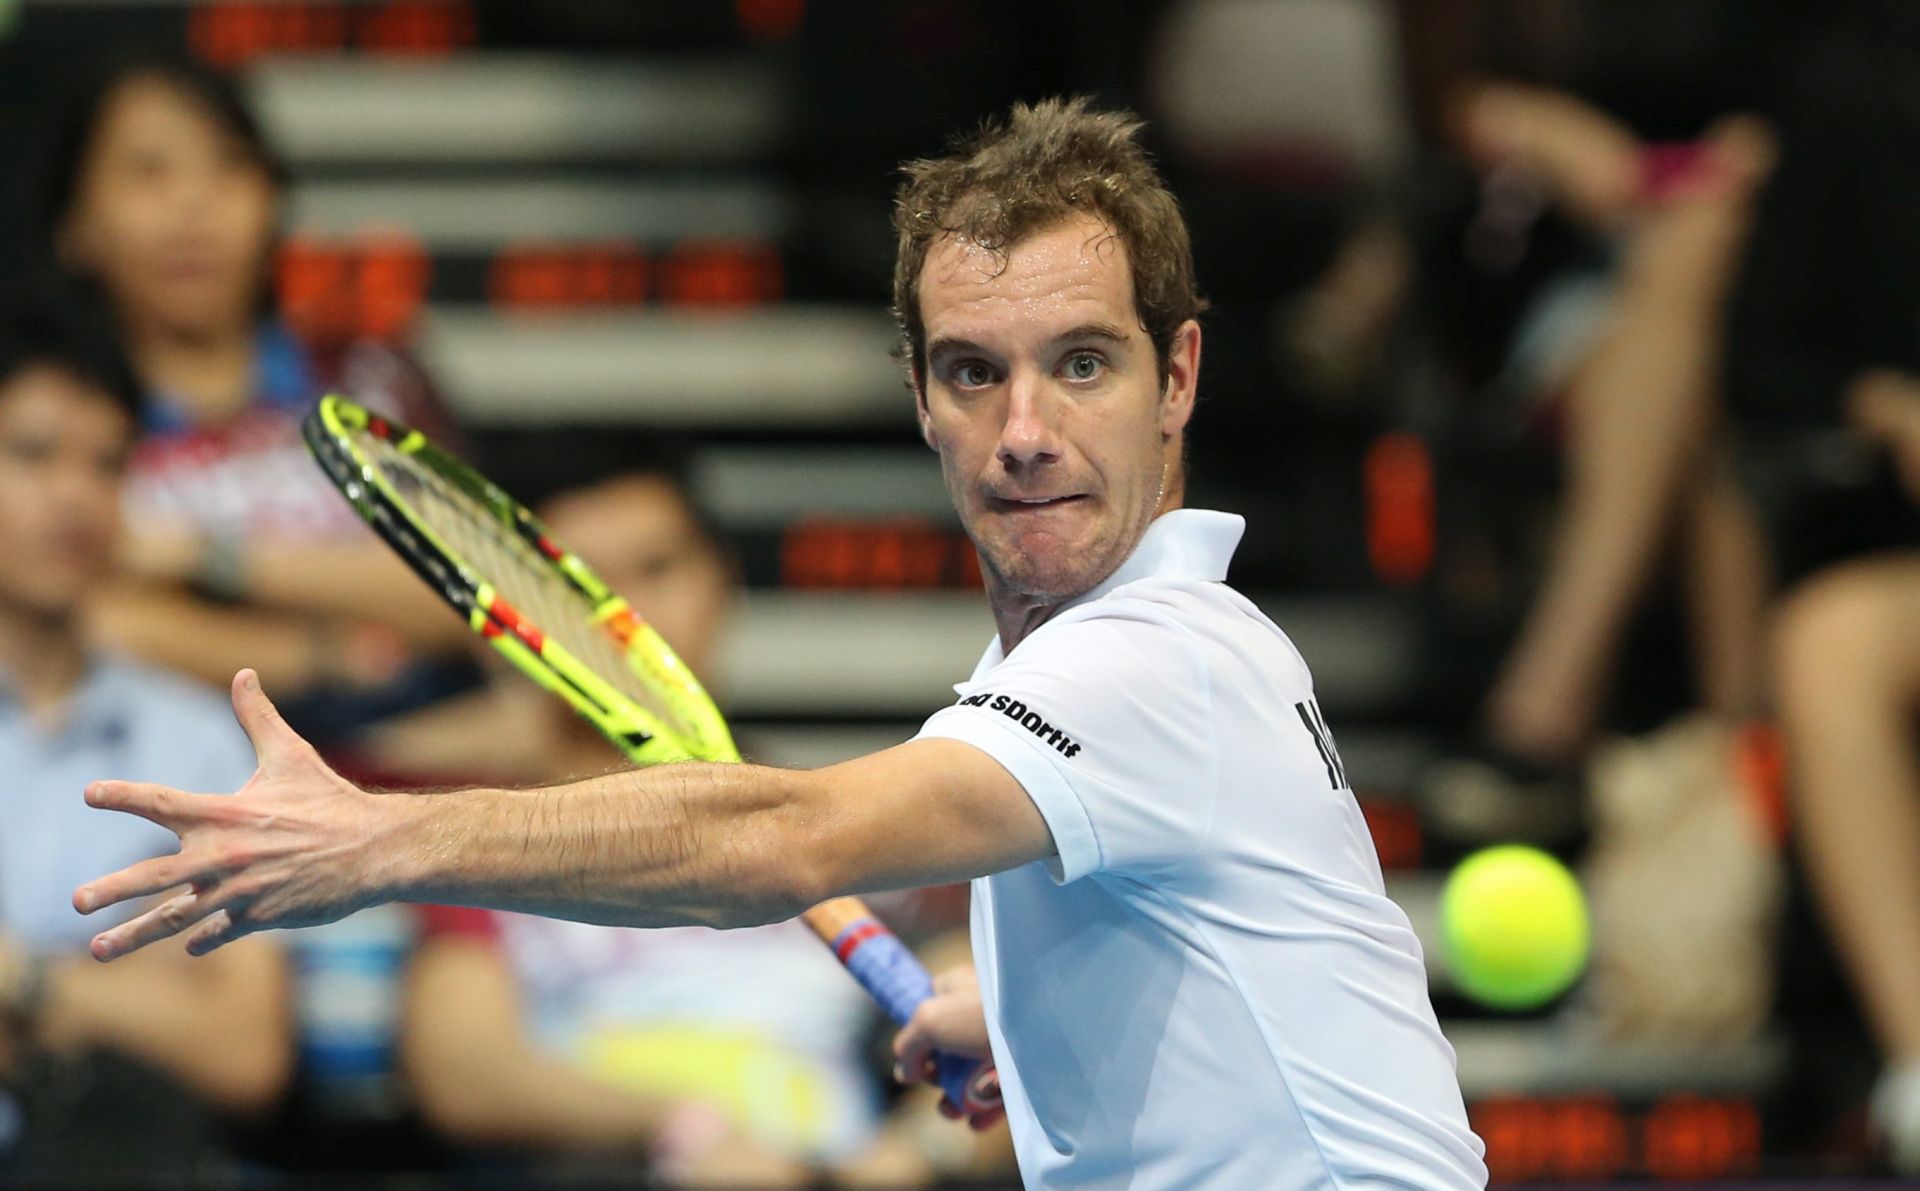 epa05058330 France’s Richard Gasquet of the Philippine Mavericks in action against Germany’s Philipp Kohlschreiber of the Japan Warriors at the second leg of the International Premier Tennis League (IPTL) at the Mall of Asia Arena in Pasay city, south of Manila, Philippines, 07 December 2015. The league features five teams made out of a hybrid mix of current and former men's and women's players.  EPA/MARK R. CRISTINO